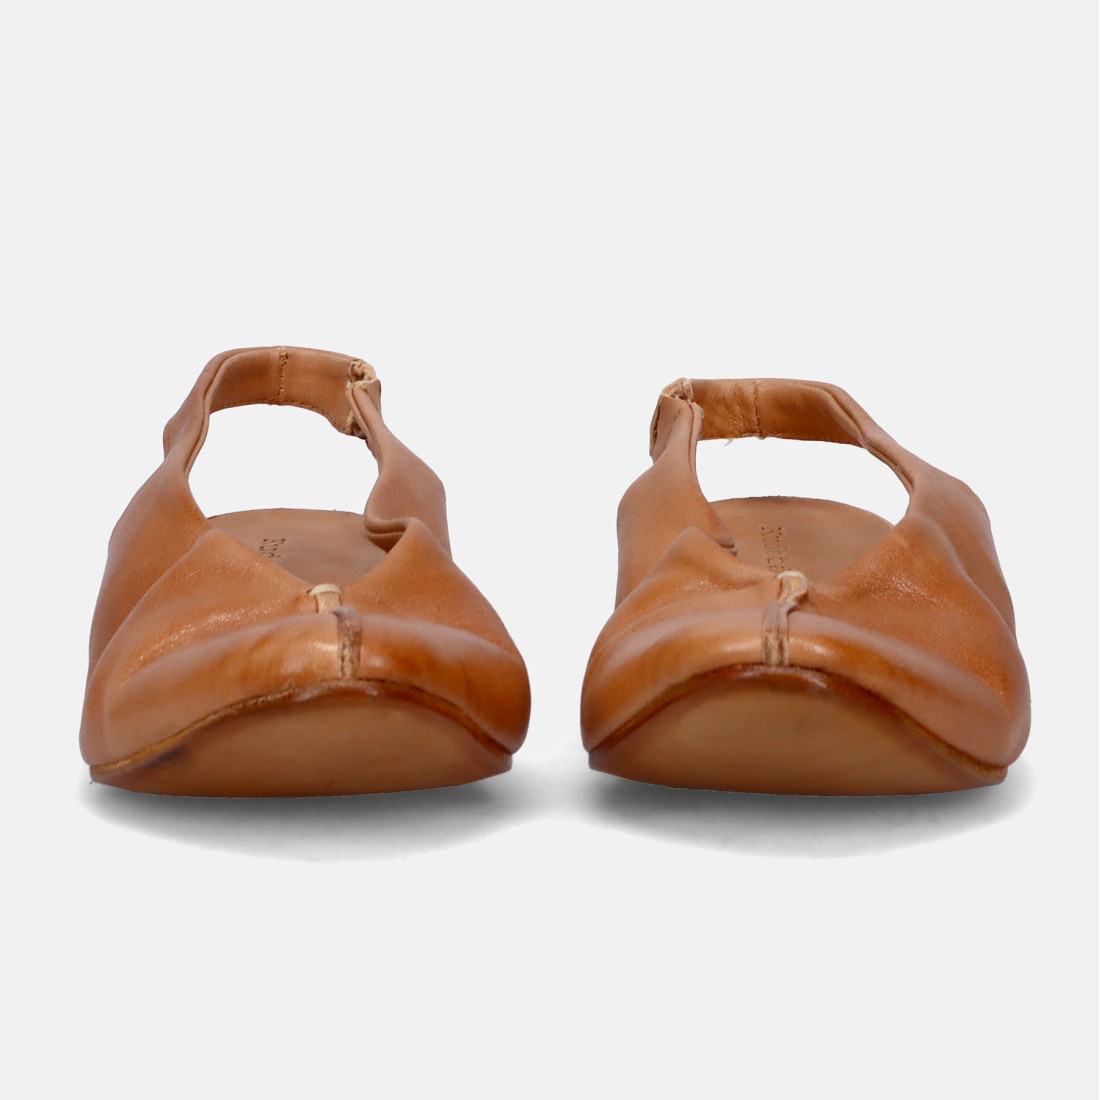 Kudetà slingback in soft tan leather with low heel